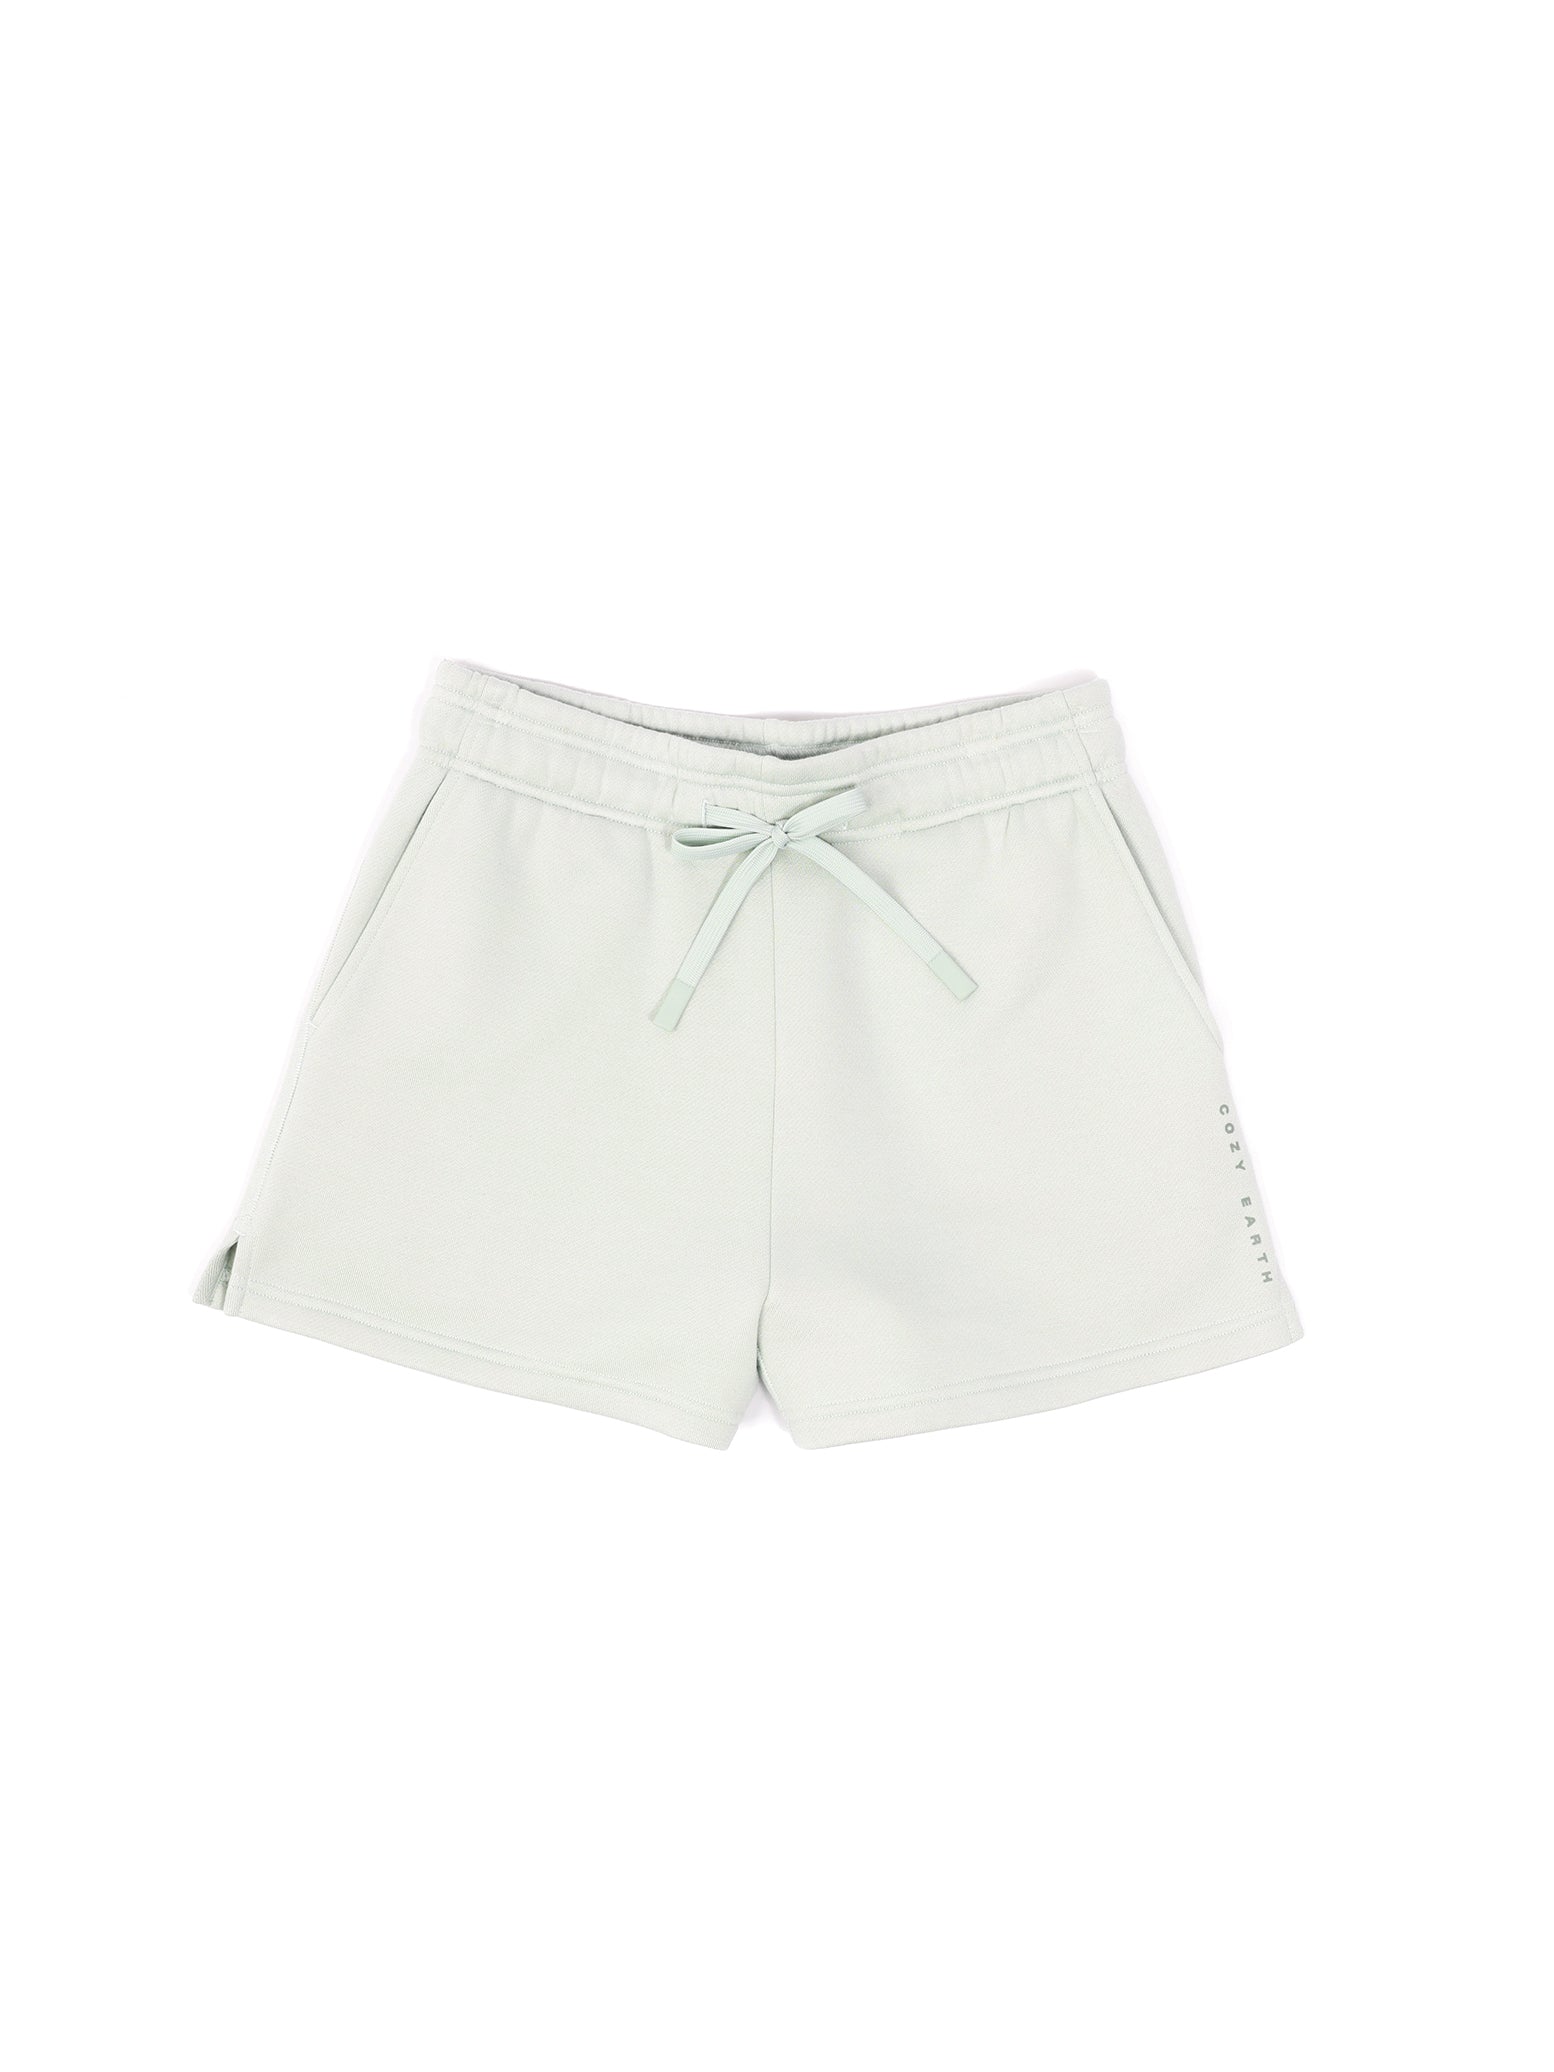 Arctic CityScape Shorts. The shorts are laying flat over a background that is white. 